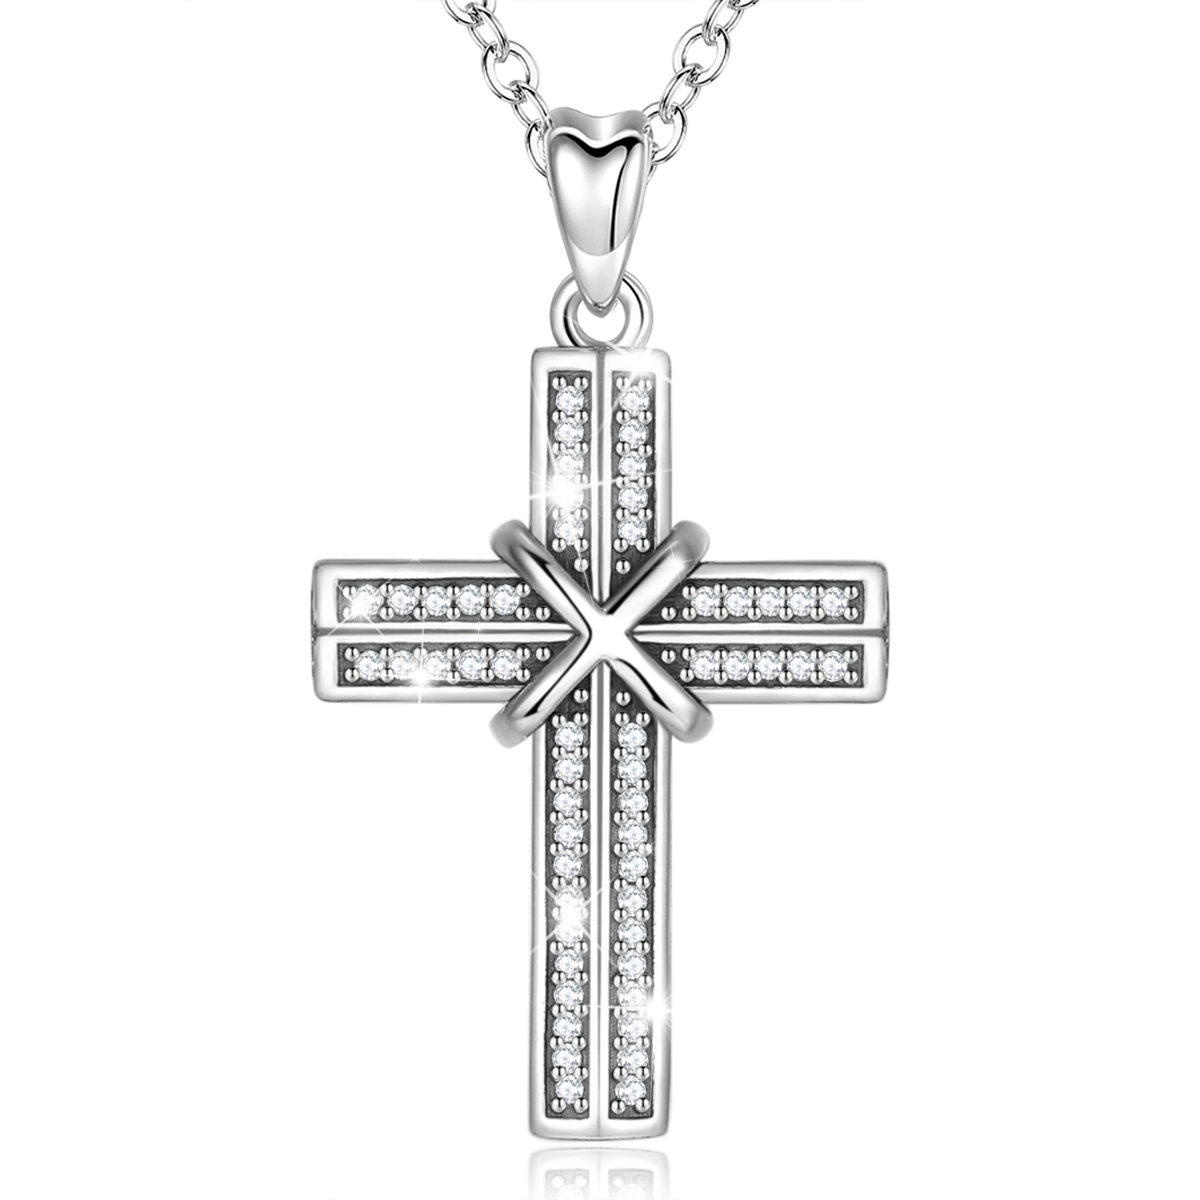 Merryshine Jewelry S925 Sterling Silver Cross Necklace for Men with Cubic Zirconia